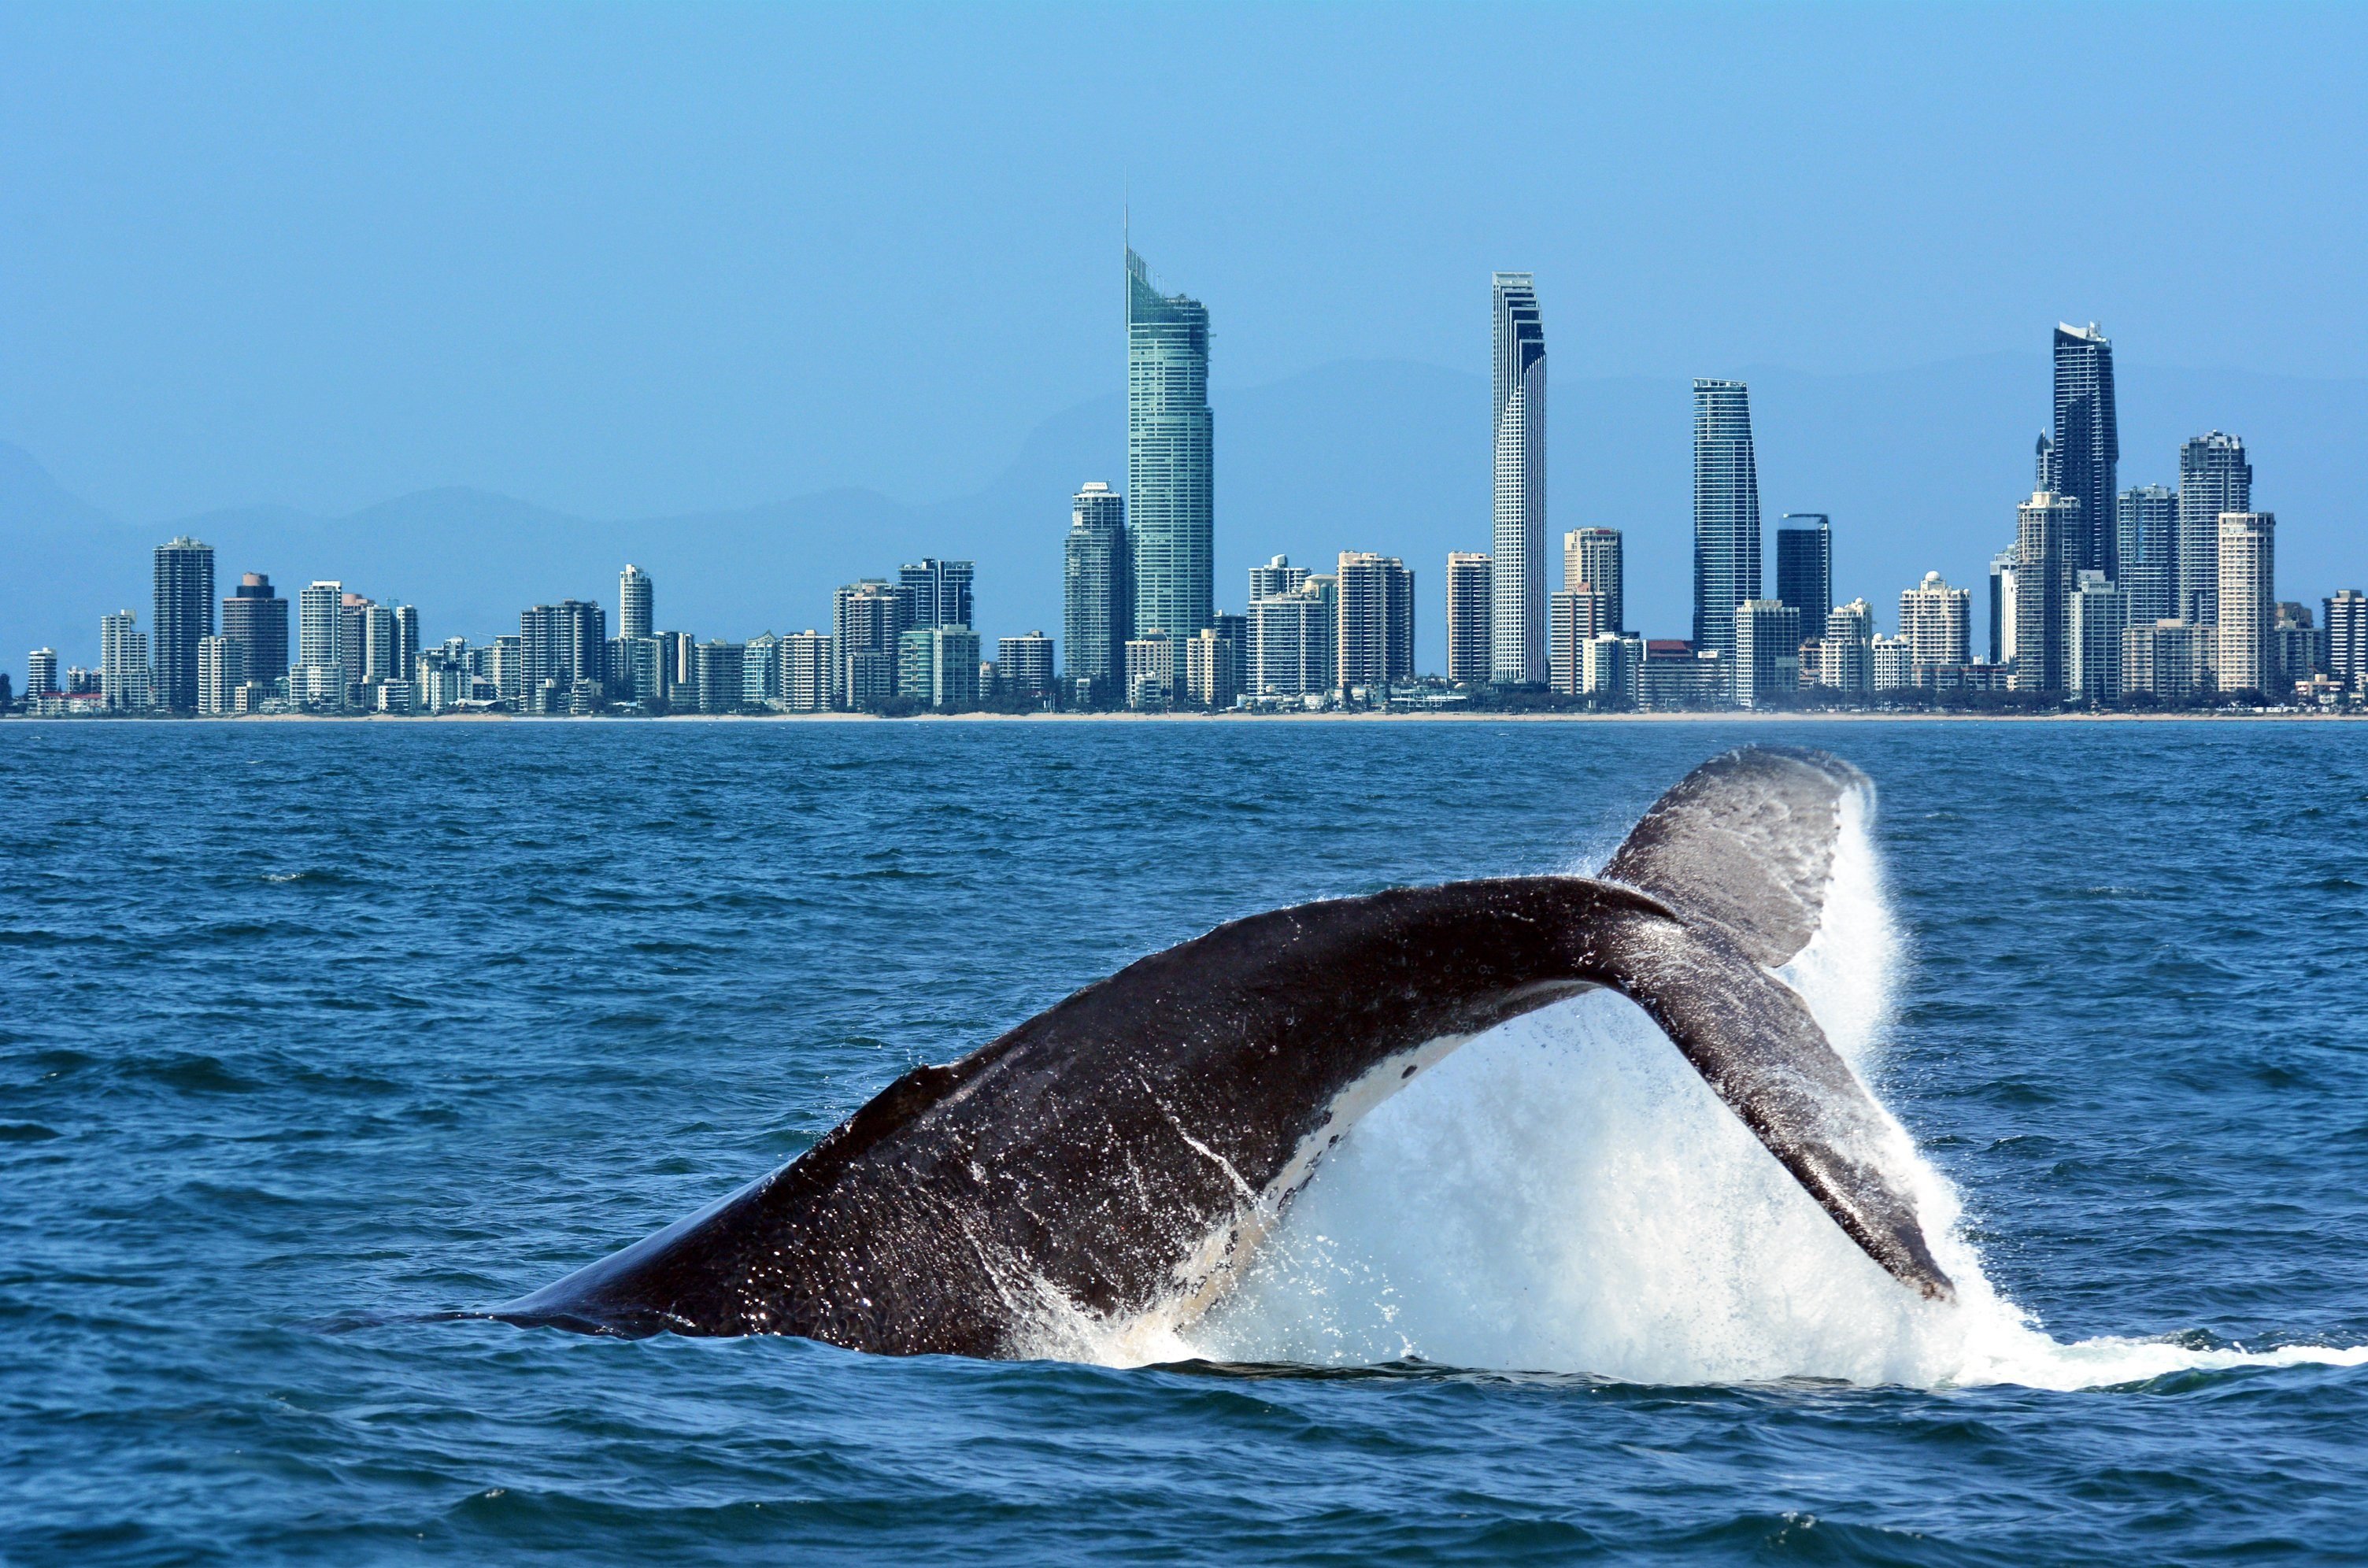 The tail of a Humpback Whale (Megaptera novaeangliae) rise above the water against Surfers Paradise skyline in Gold Coast Queensland Australia